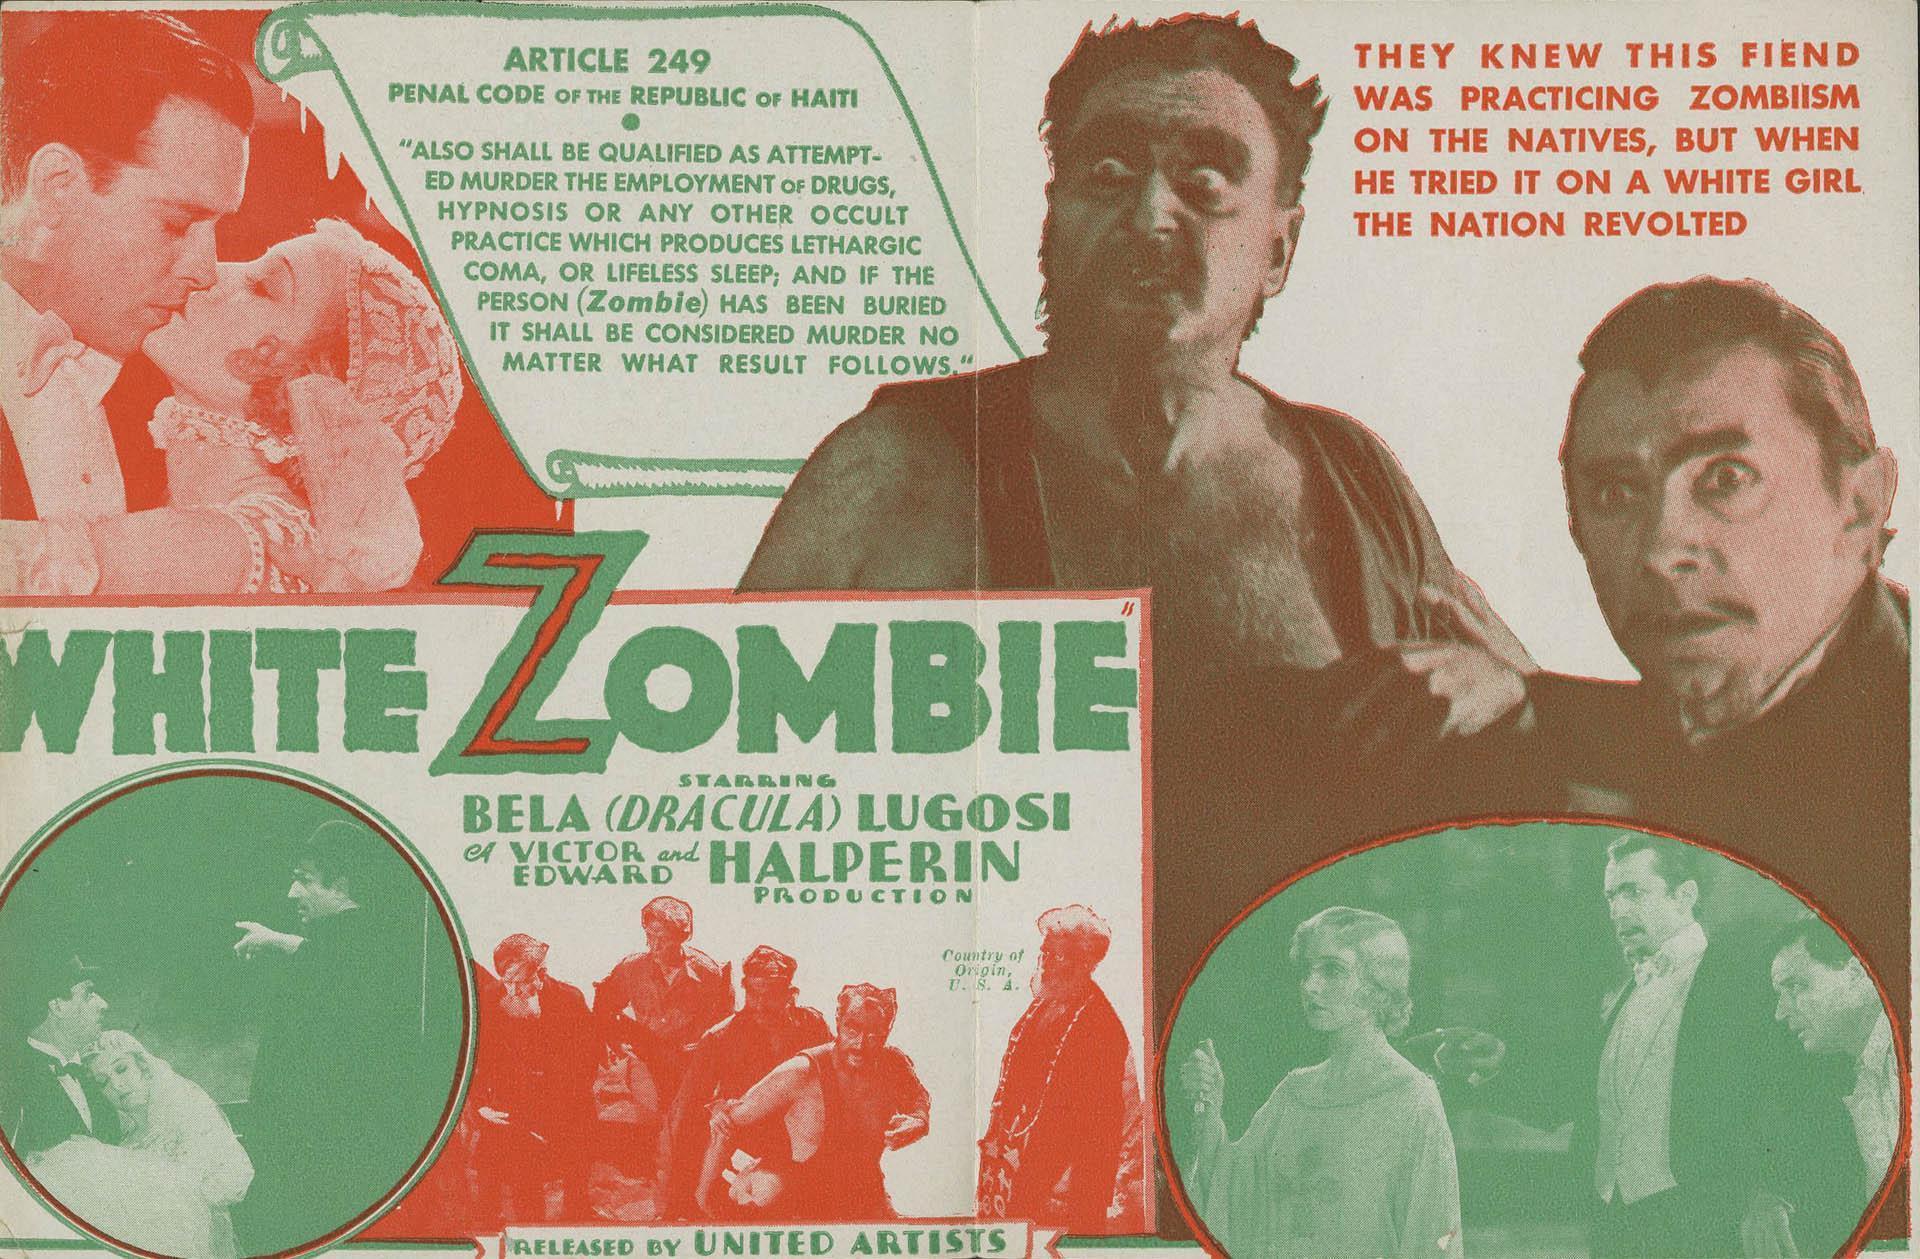 White Zombie 1930s Movie Posters Wallpaper Image